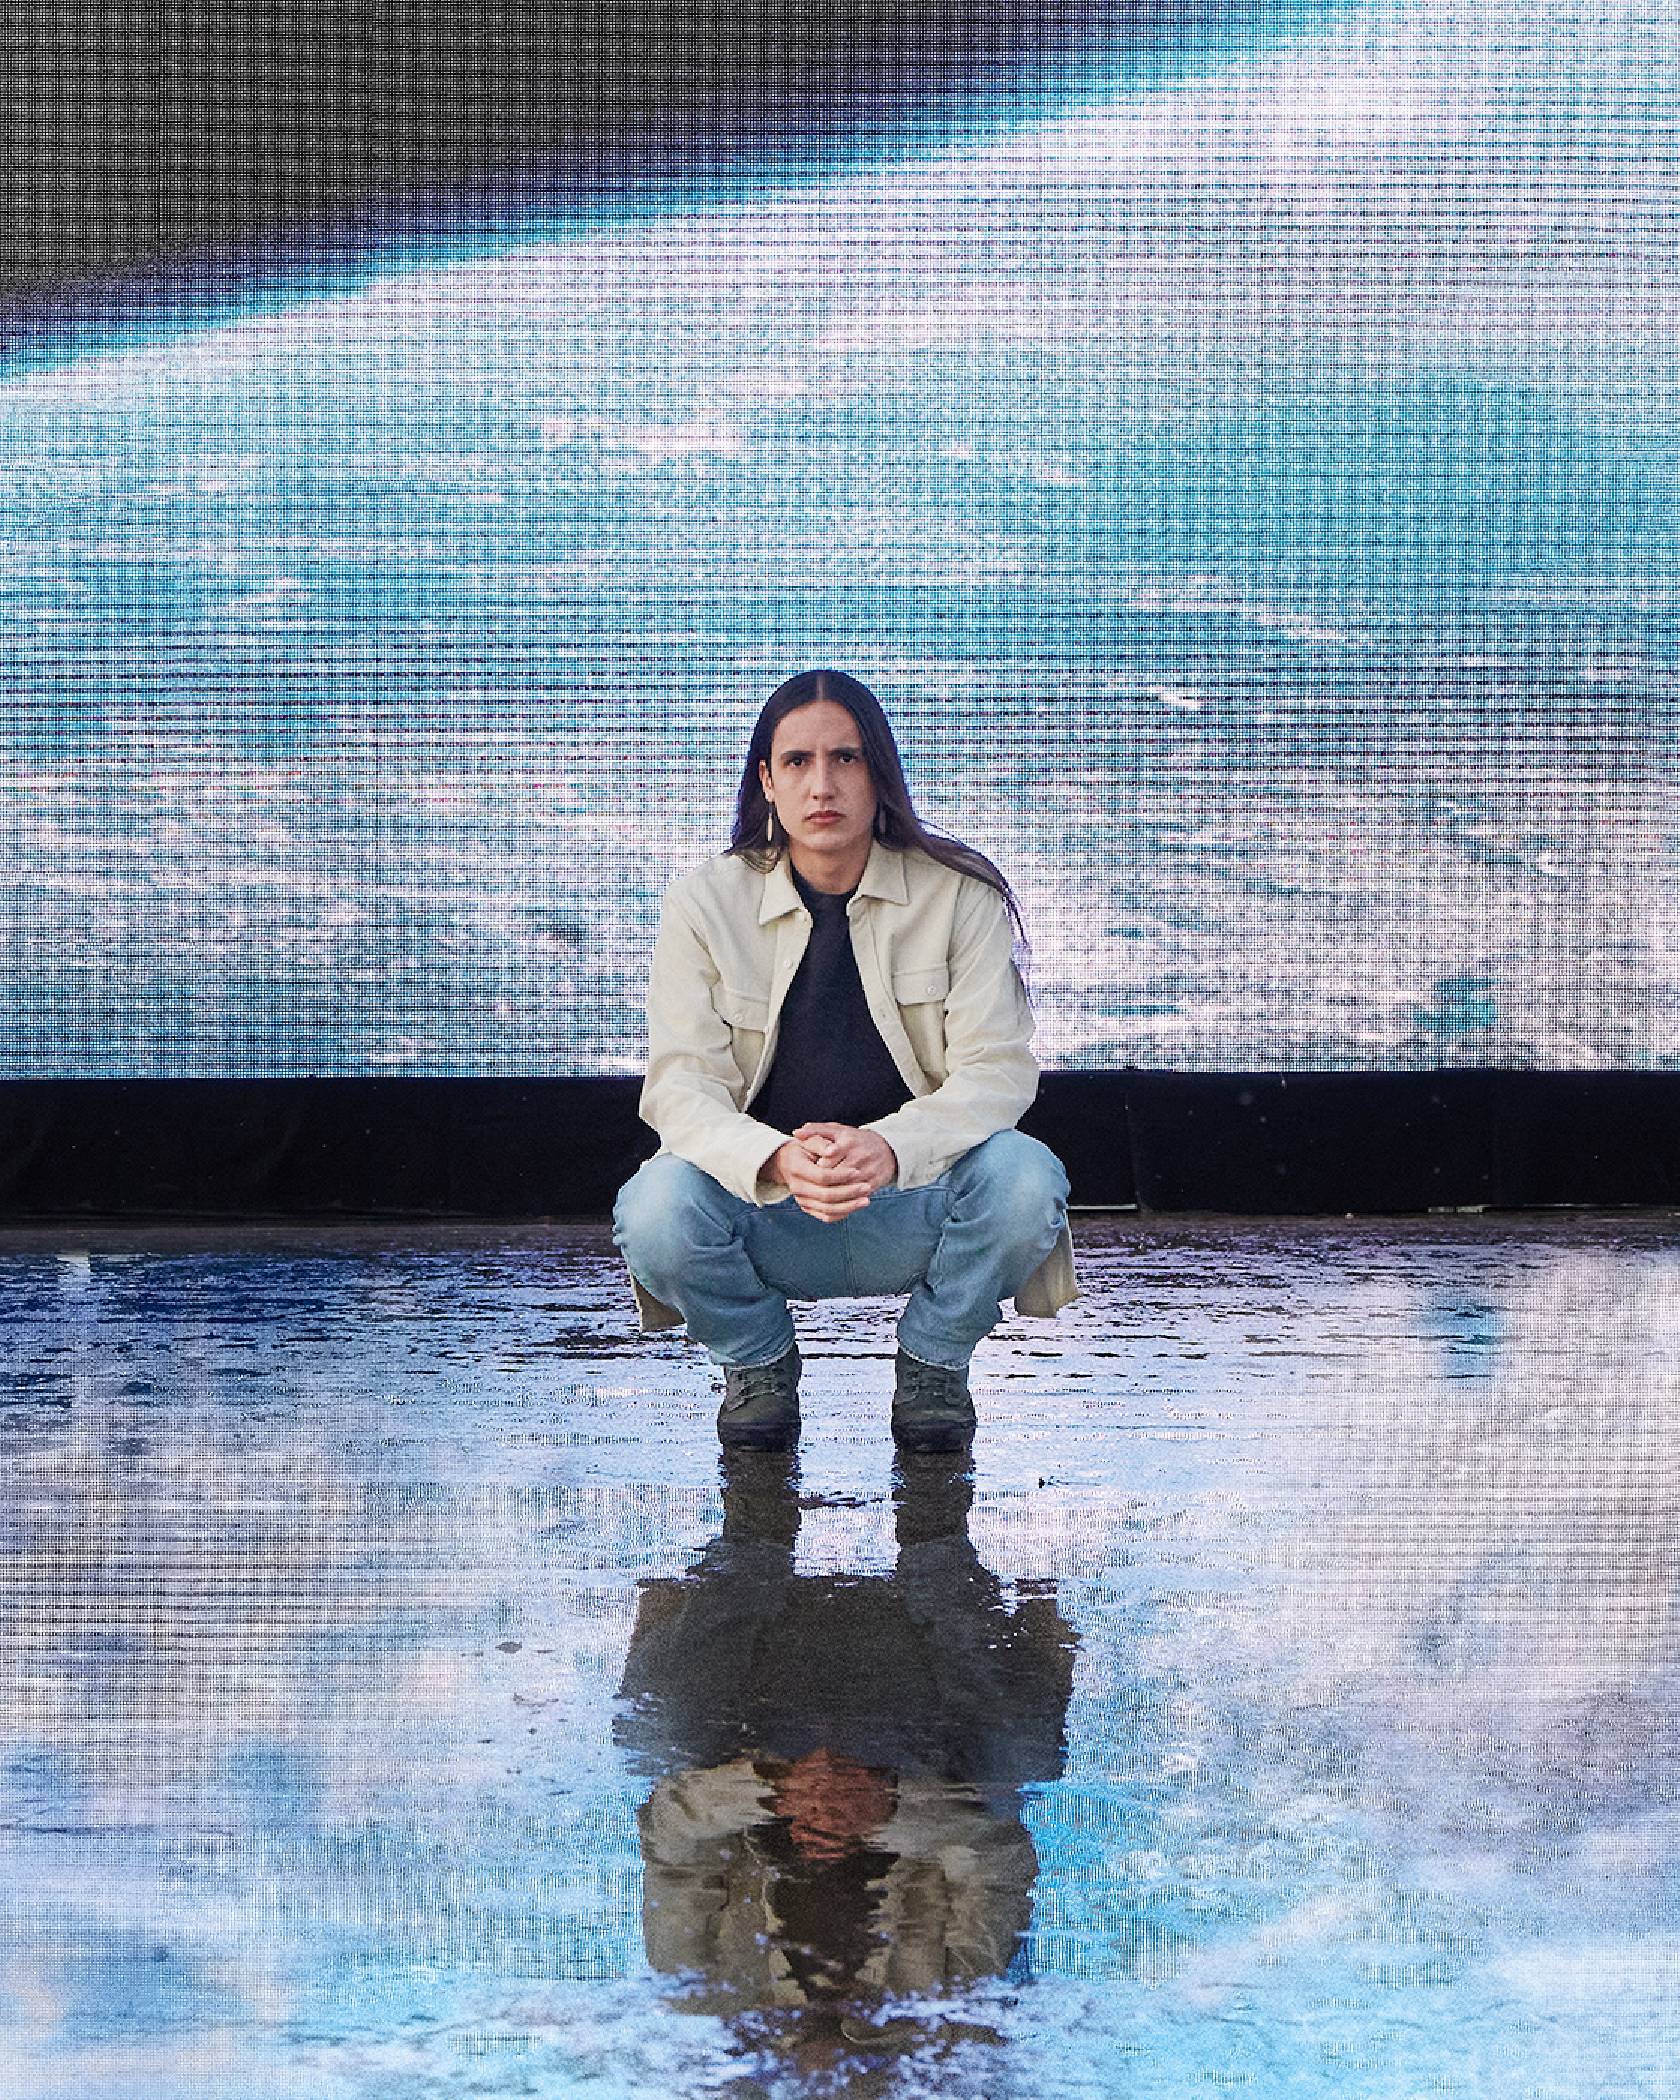 Xiuhtezcatl squatting in front of a screen wearing Levi jeans and a button up shirt.